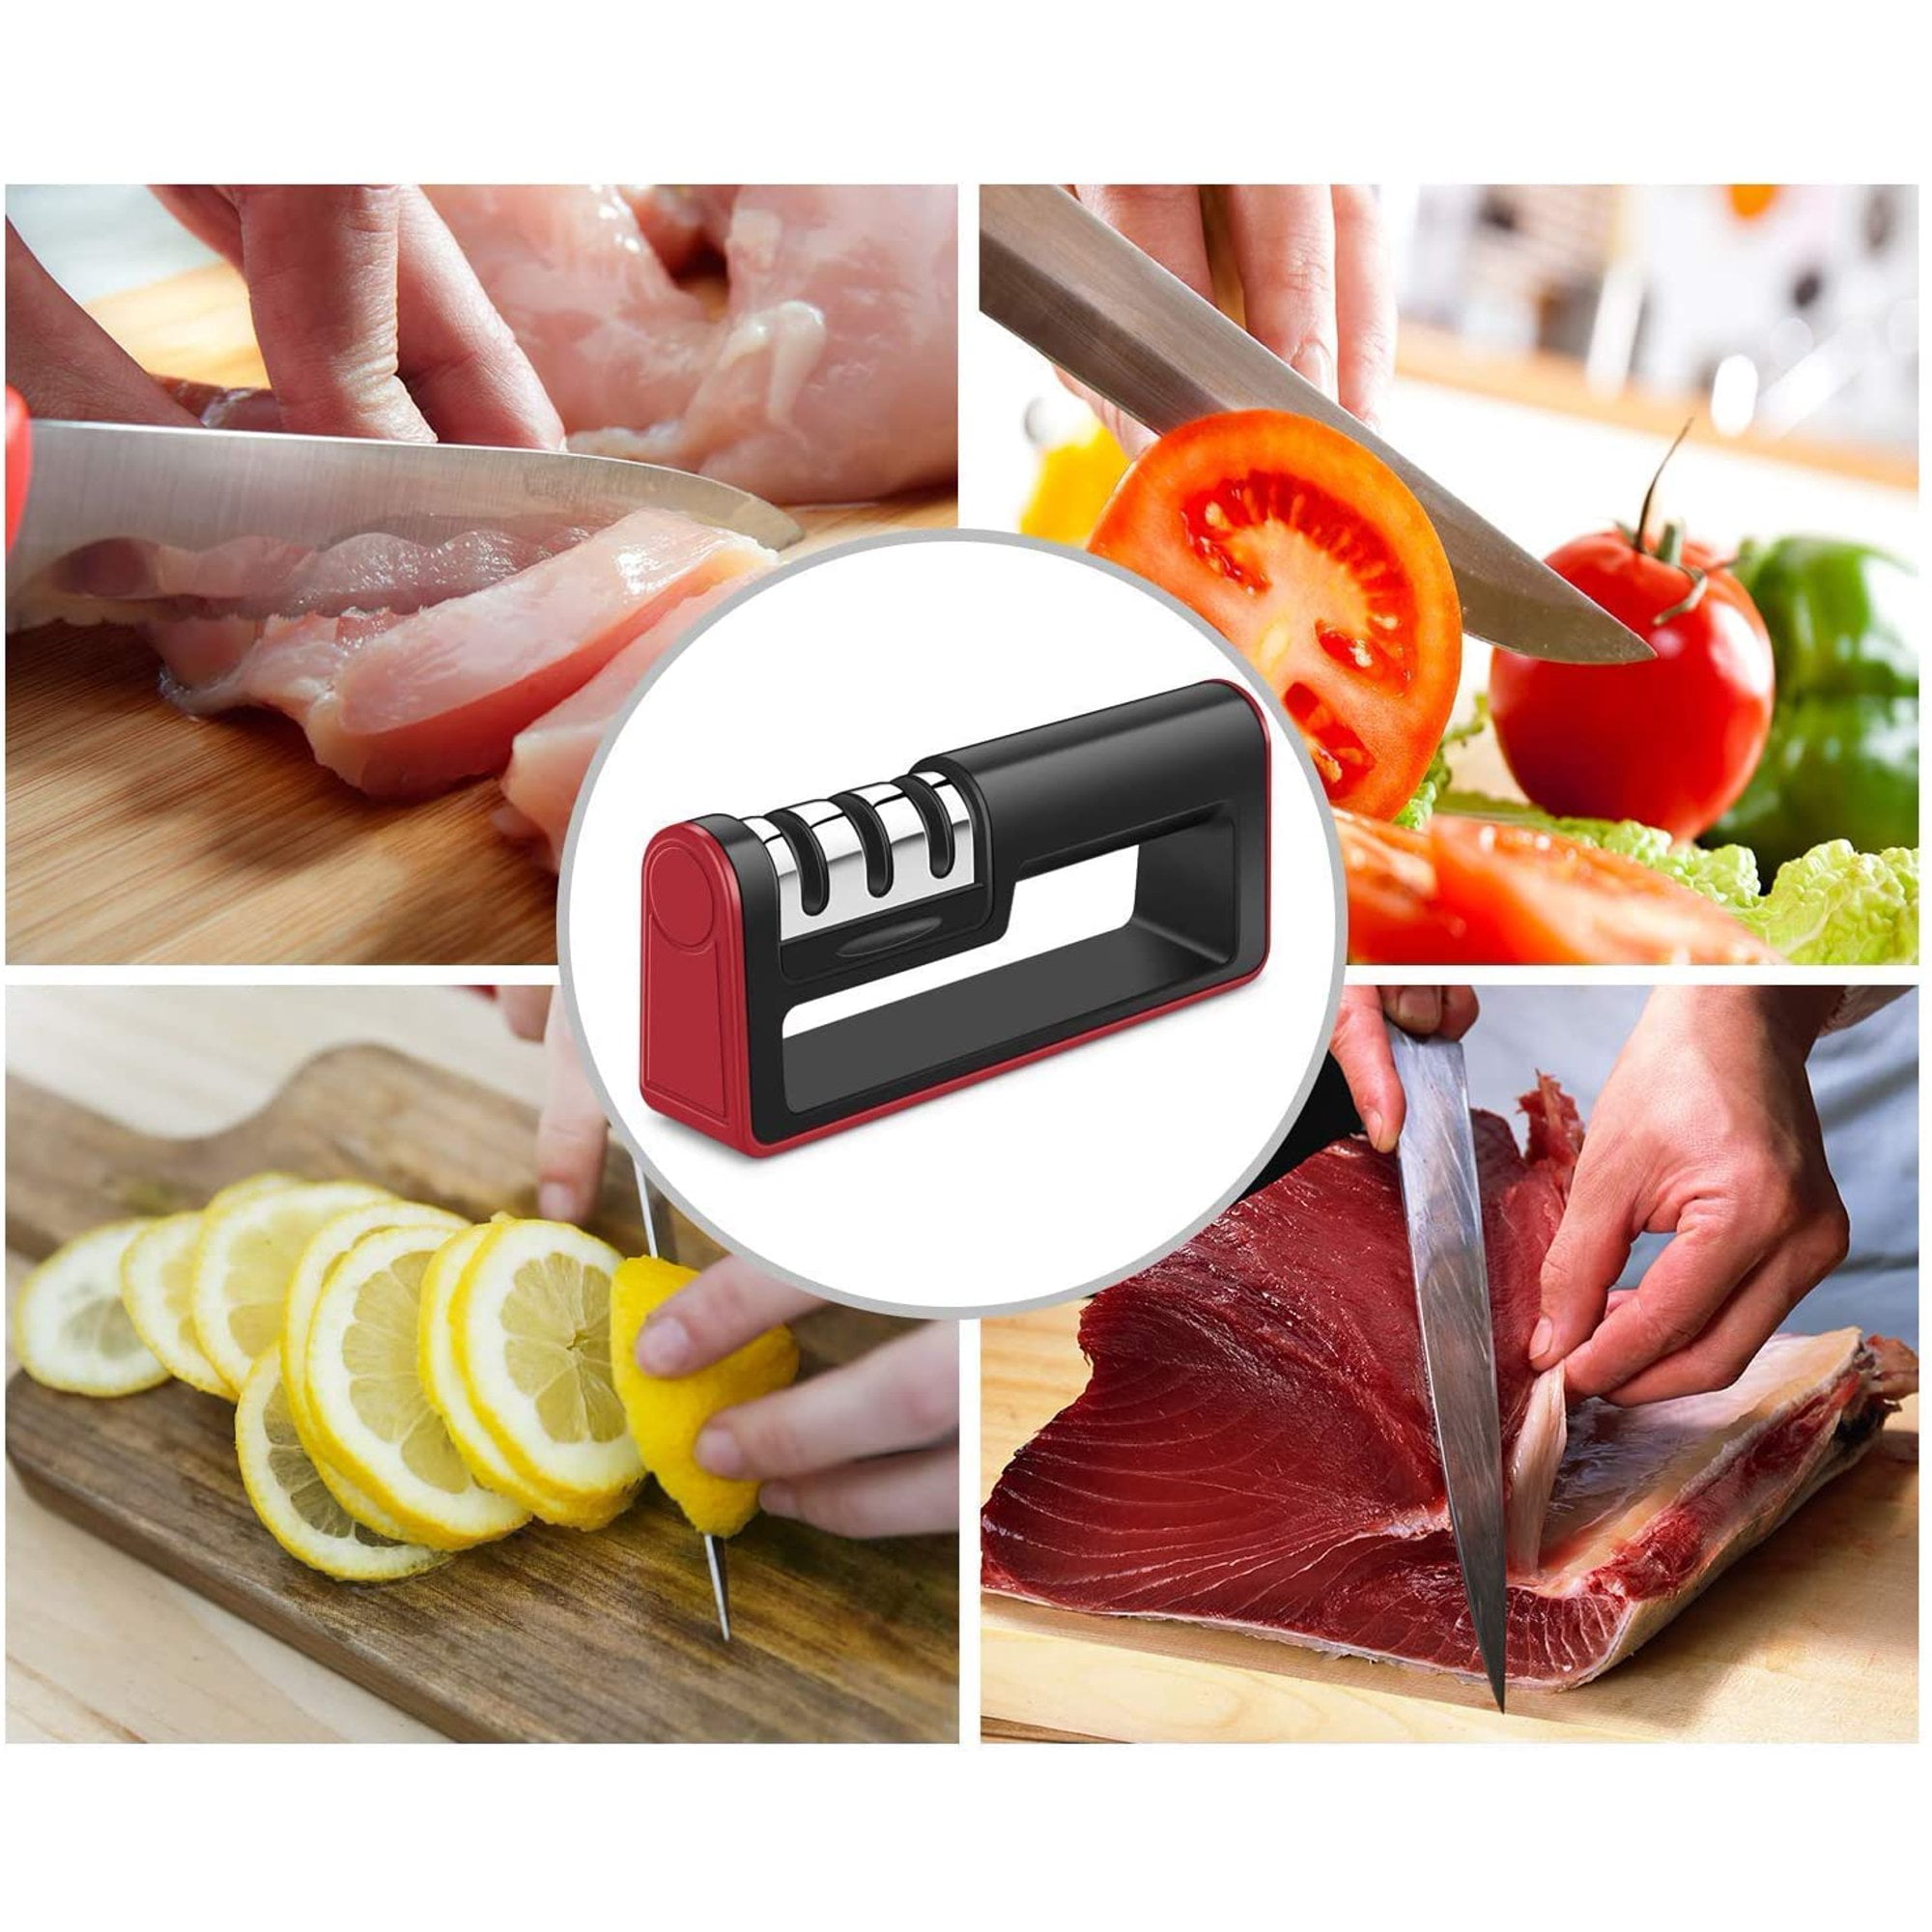 4-in-1 Kitchen Knife Accessories,3-Stage Kitchen Knife  Sharpener,Professional Knife Sharpening Tool to Restore Non-Serrated Blades  QuicklyHelps